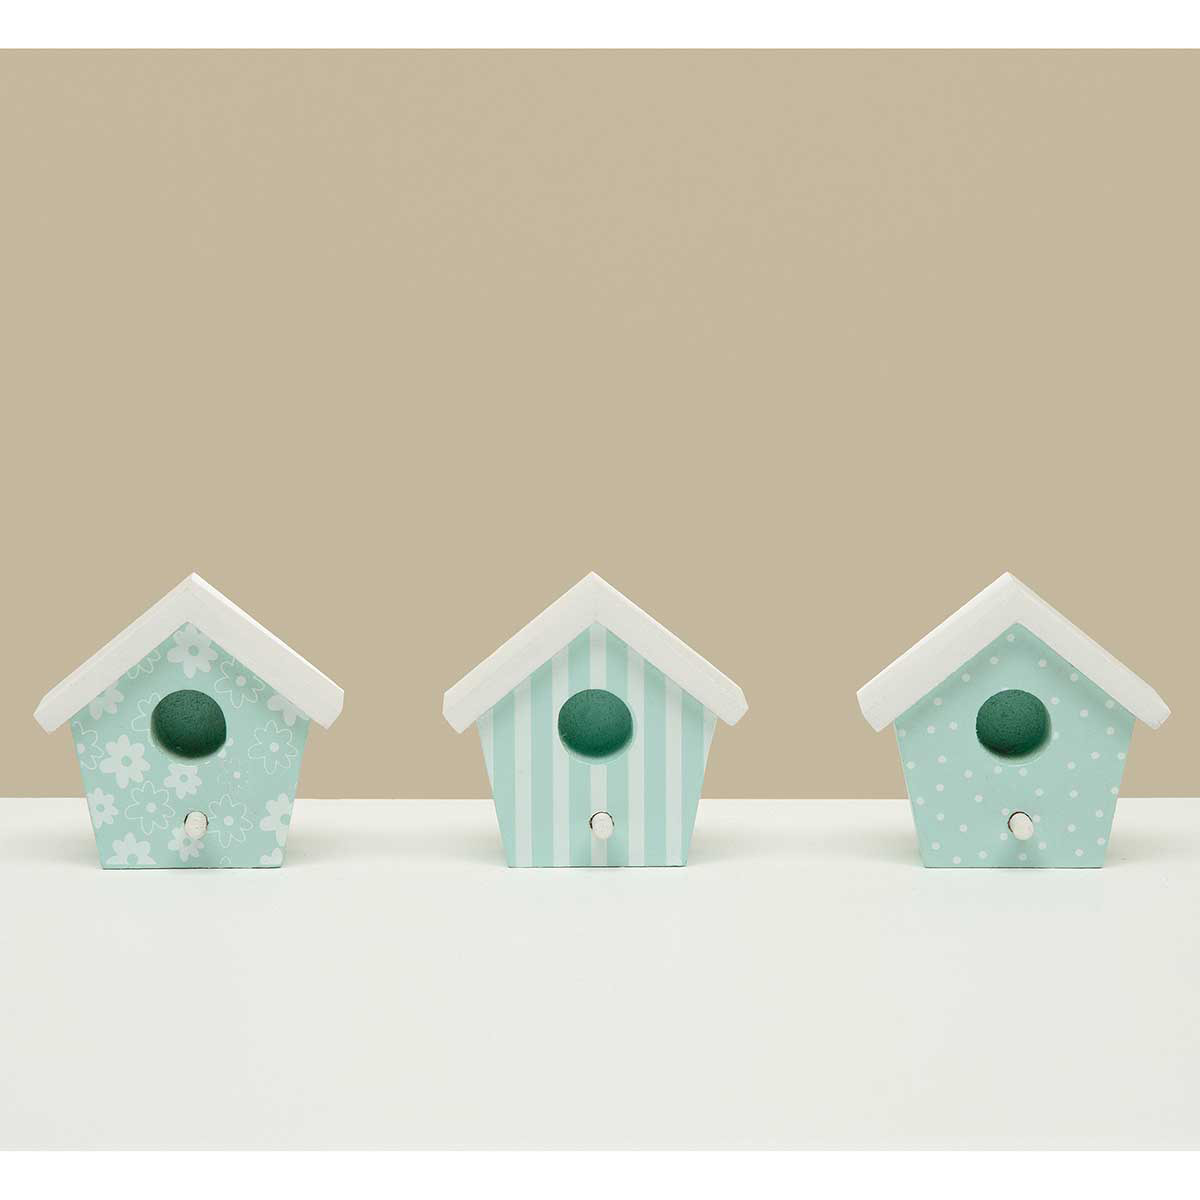 b50 SIT-A-BOUT BIRDHOUSE 3ASSORTED 2.25IN X 1.25IN X 2.25IN WOOD